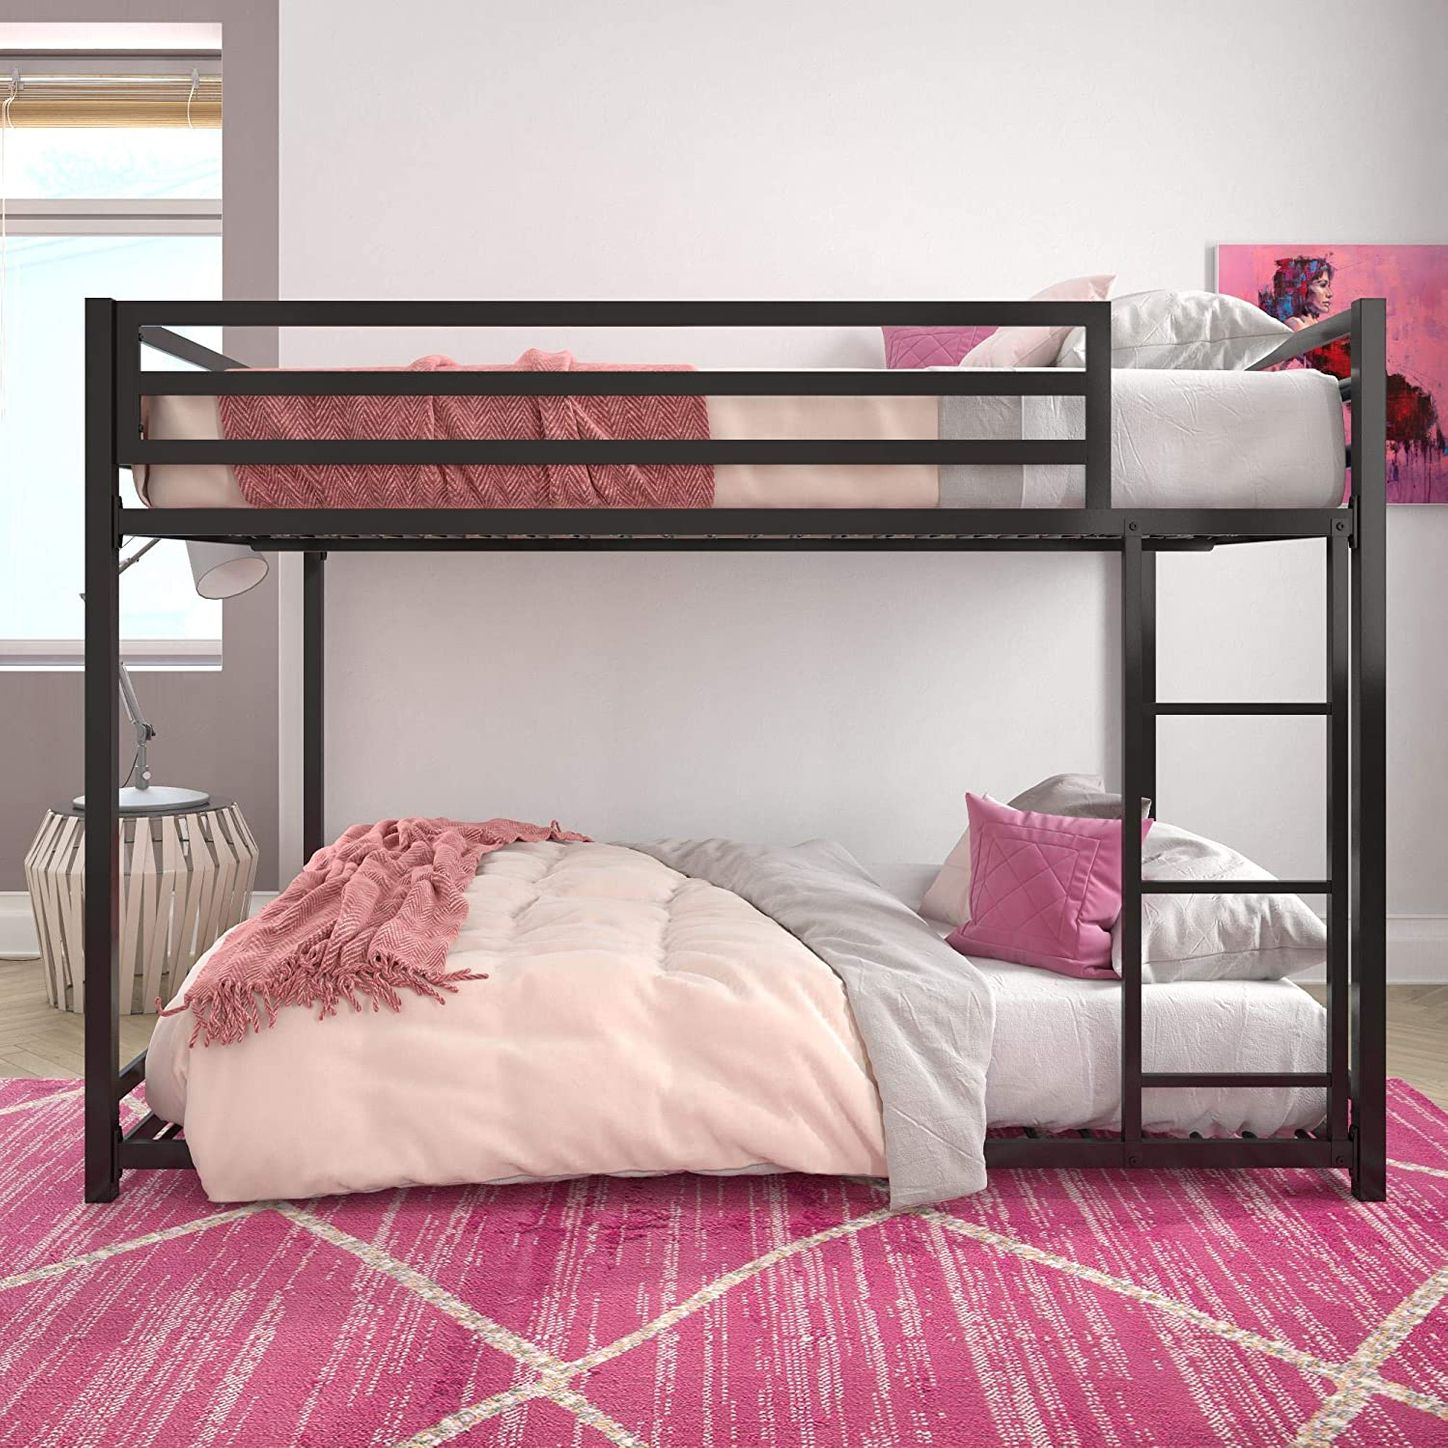 8 Best Bunk Beds 2020 The Strategist, Bunk Bed Safe For 4 Year Old